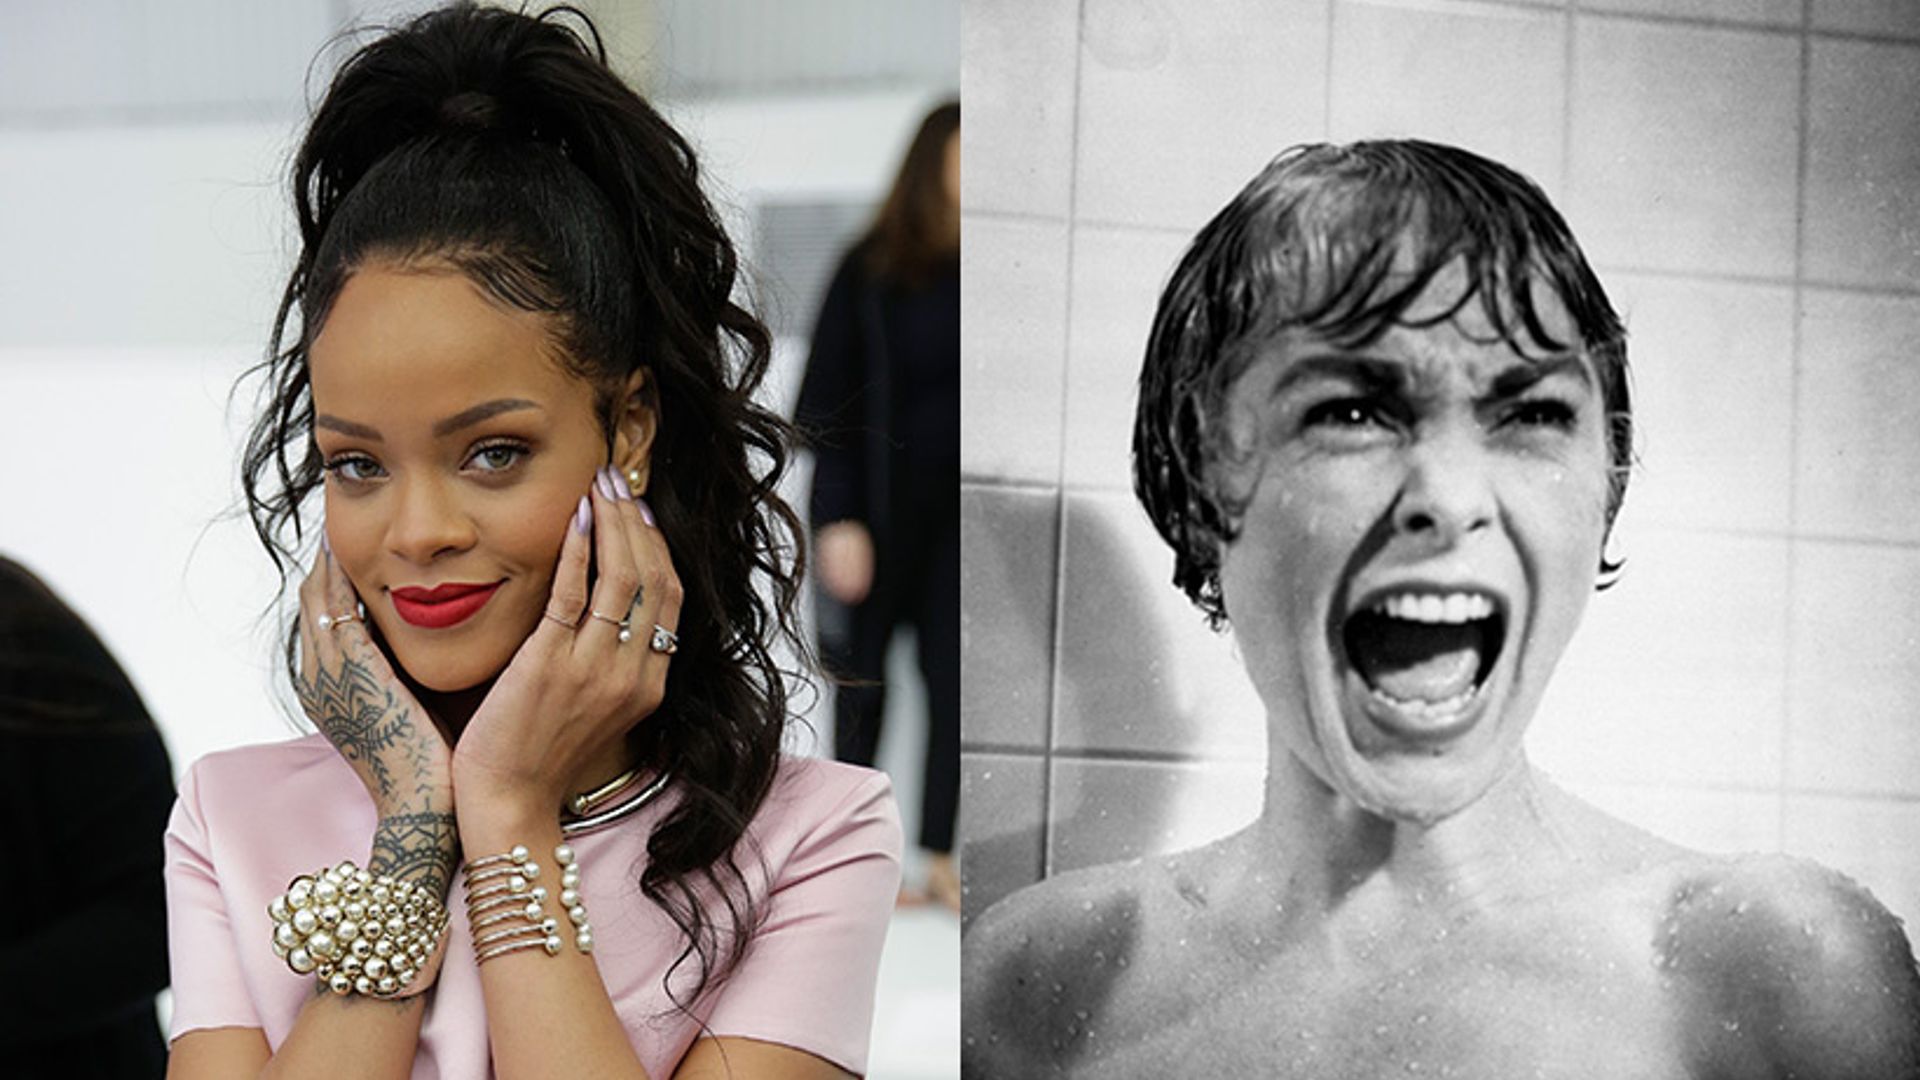 Rihanna to star in iconic role for Psycho prequel TV show, Bates Motel